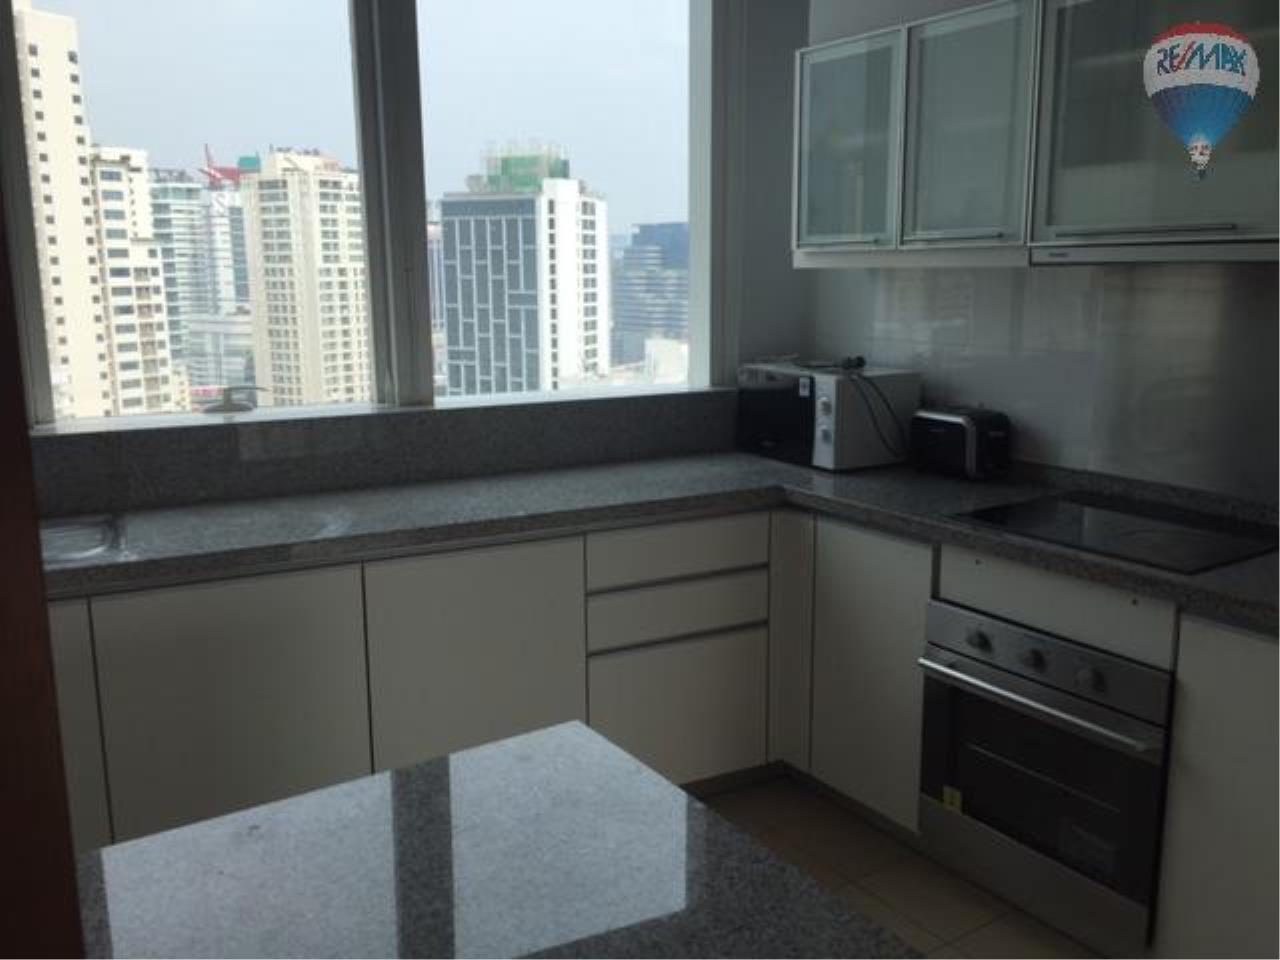 RE/MAX Properties Agency's 3 Bedroom 146 q.m. for Rent at Millennium Residence 5